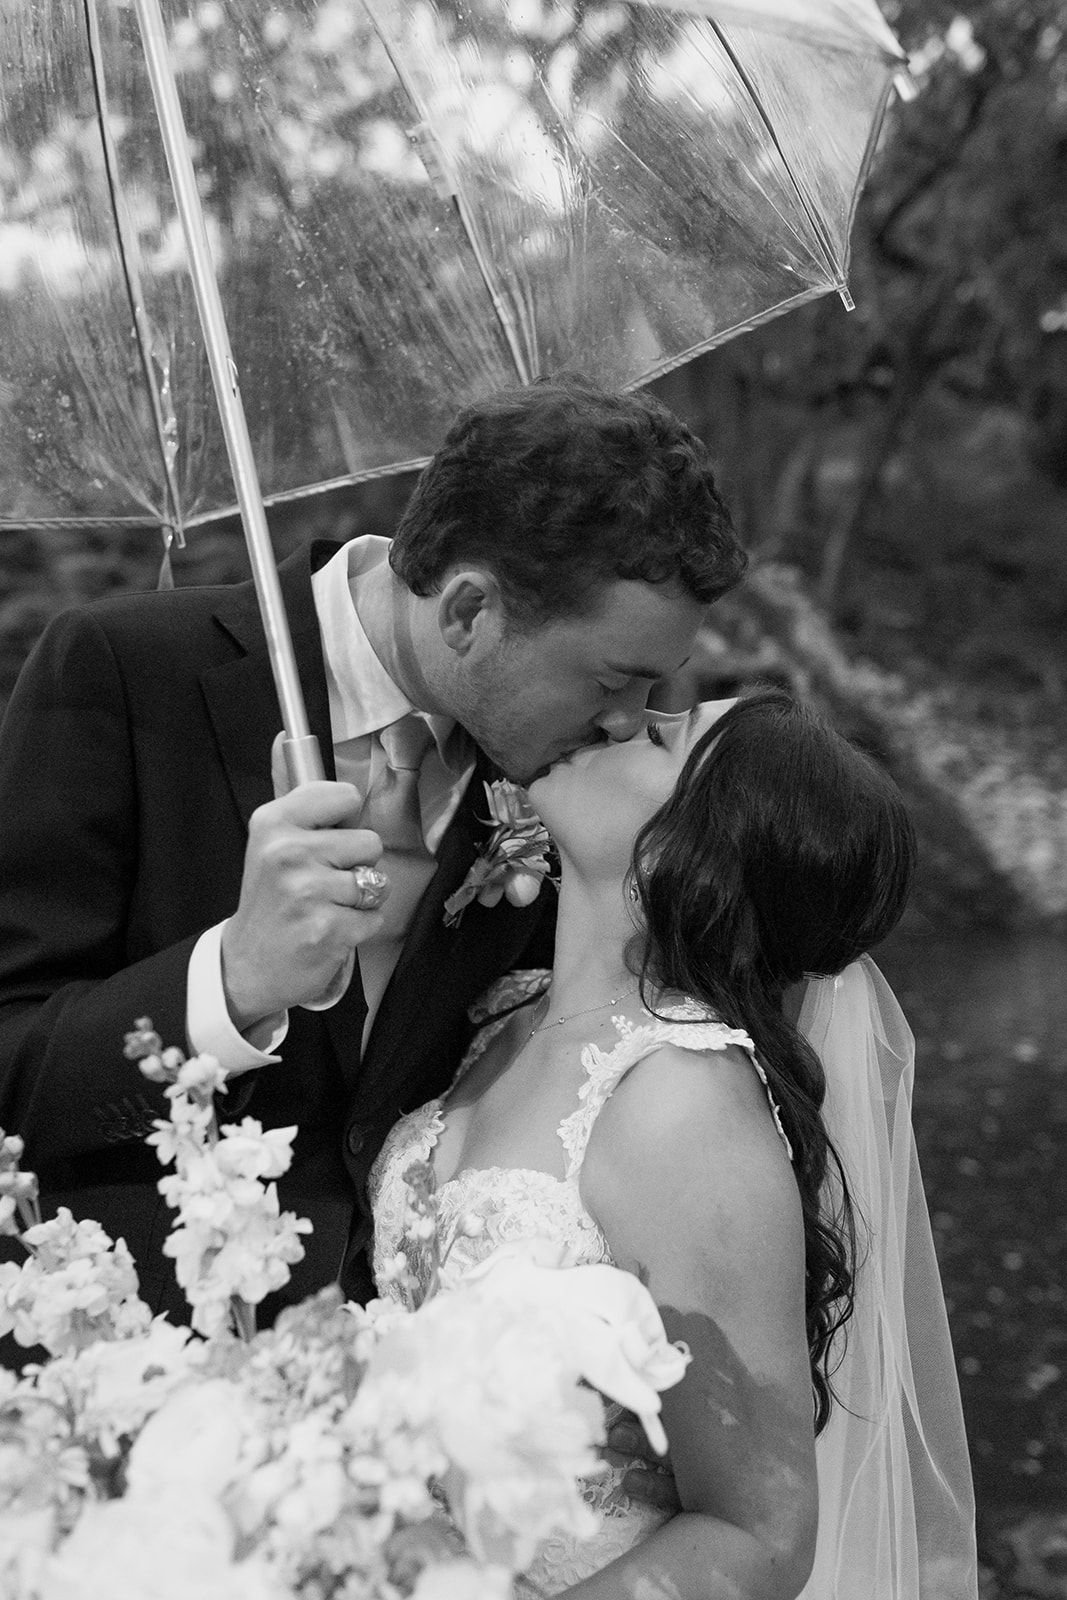 Bride and groom in front of a waterfall with an umbrella